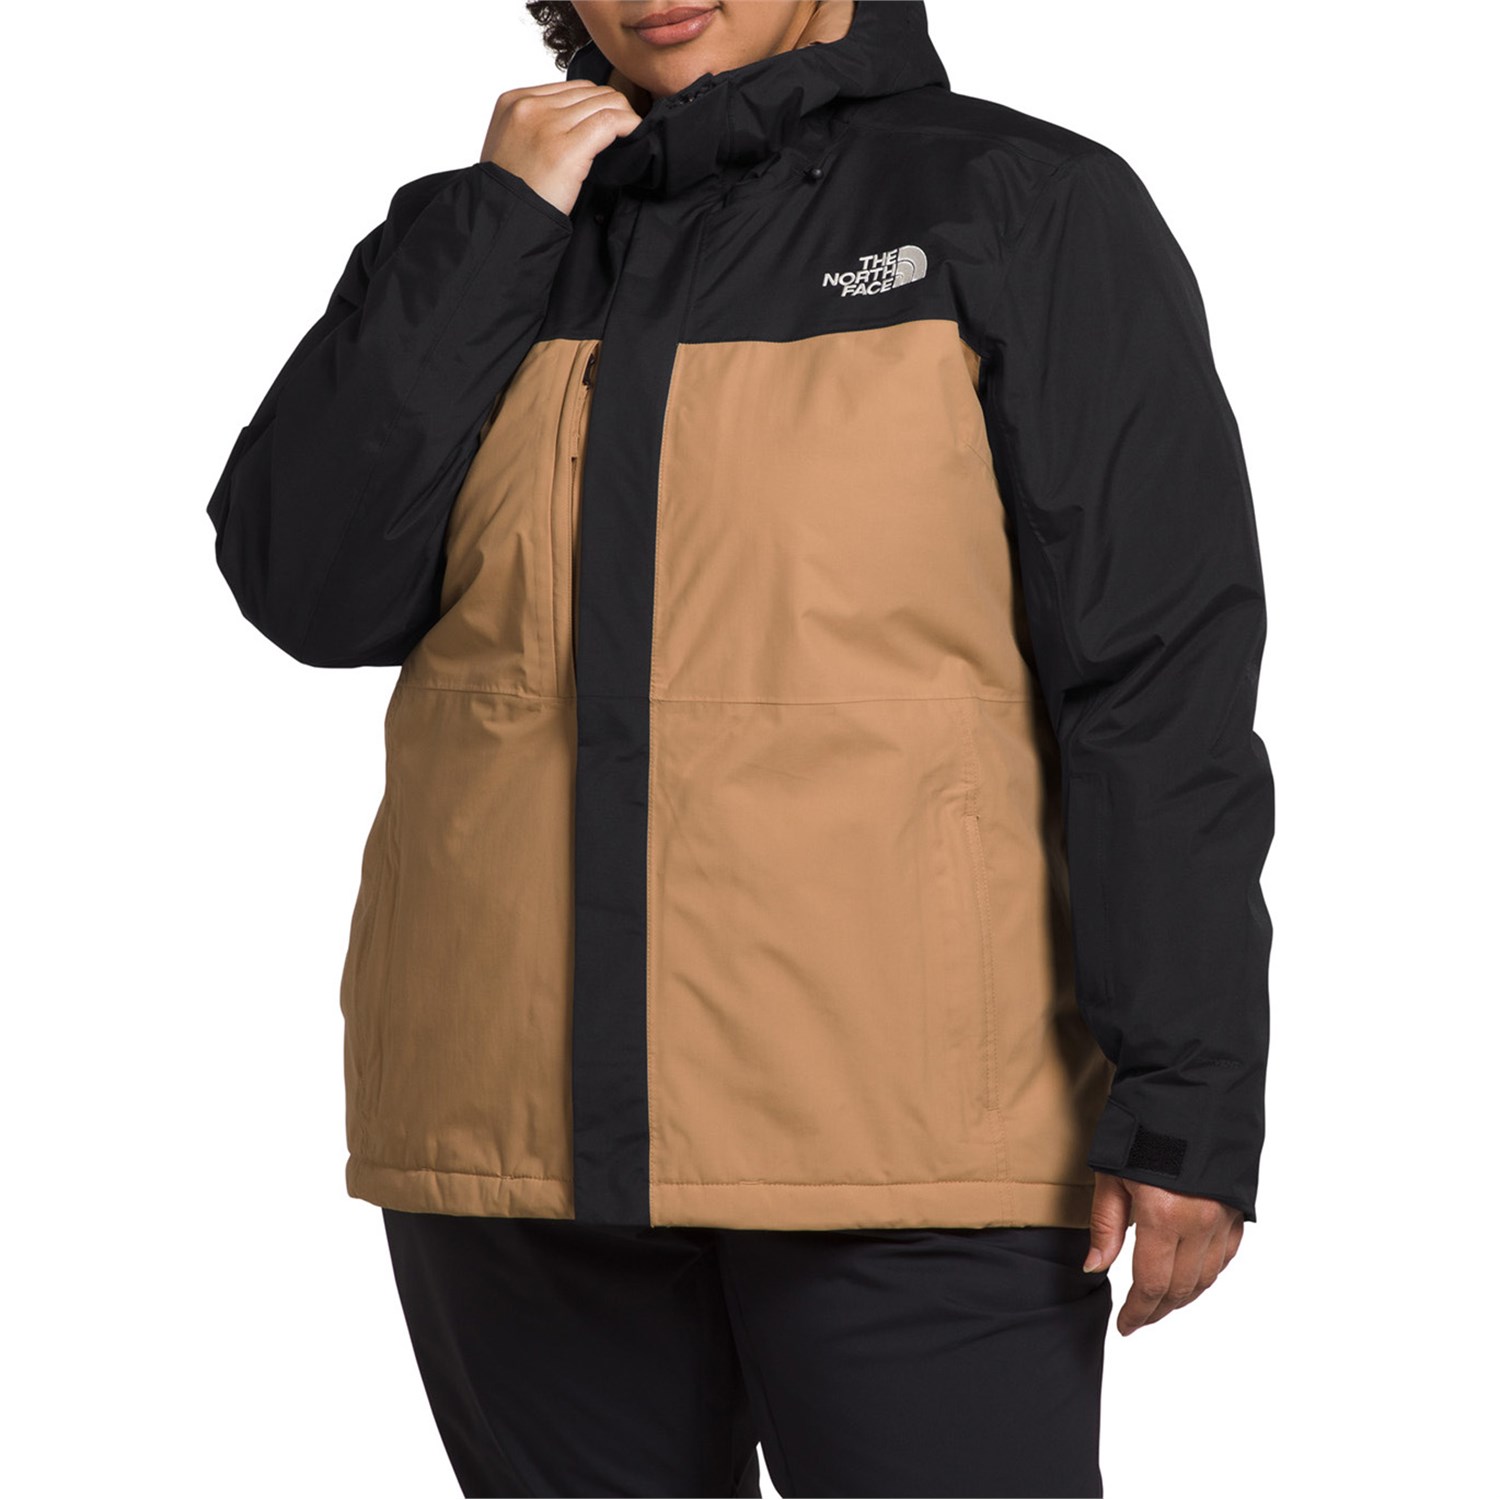 Куртка The North Face Freedom Insulated Plus, цвет TNF Black/Almond Butter куртка the north face insulated фуксия черный